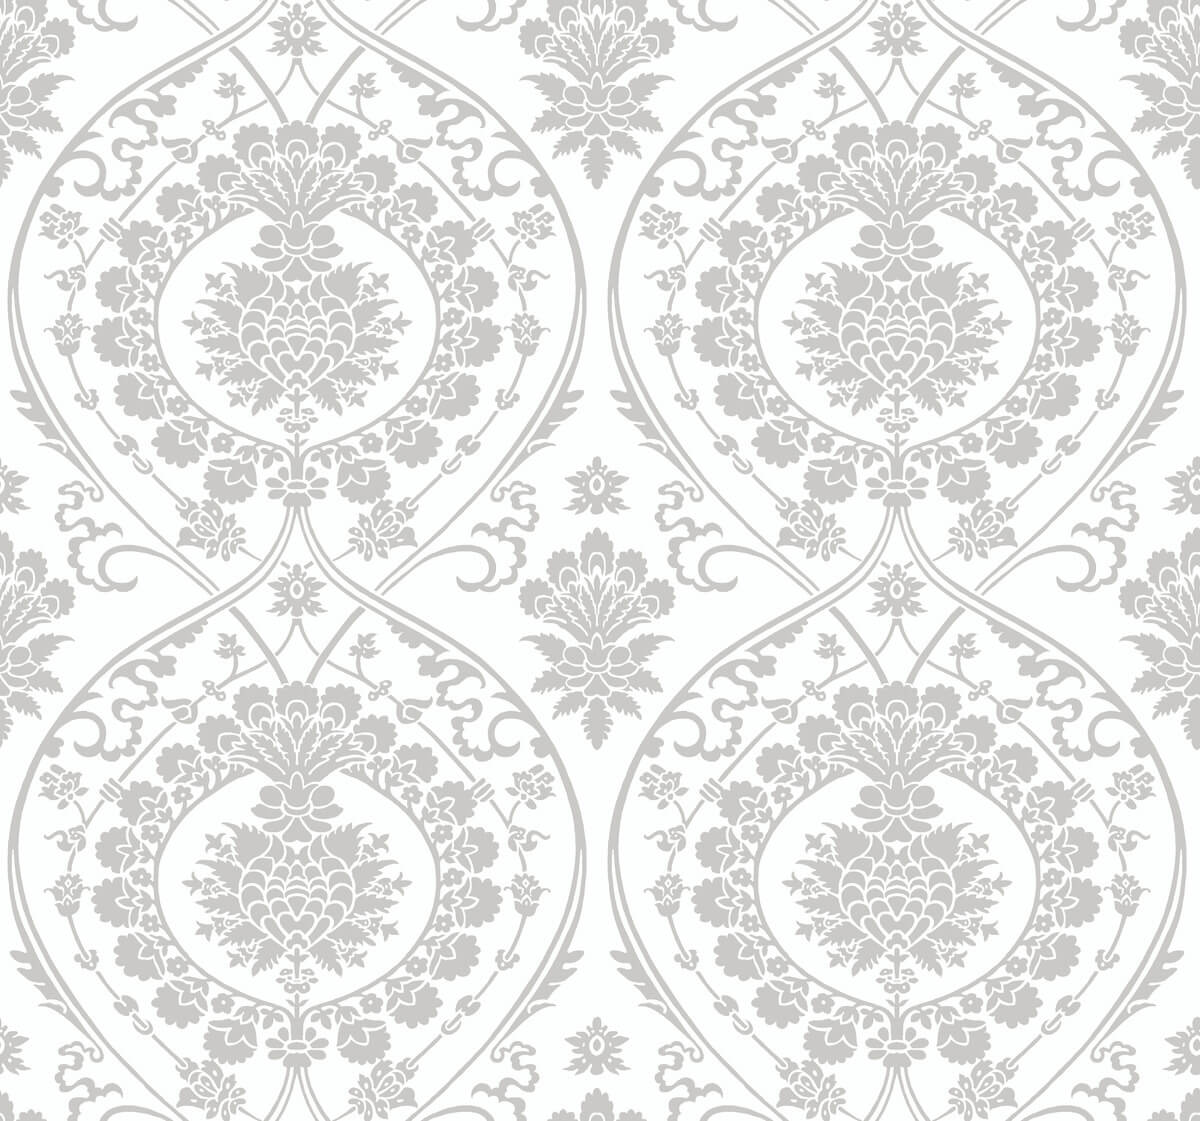 Damask Resource Library Imperial Damask Wallpaper - White & Silver